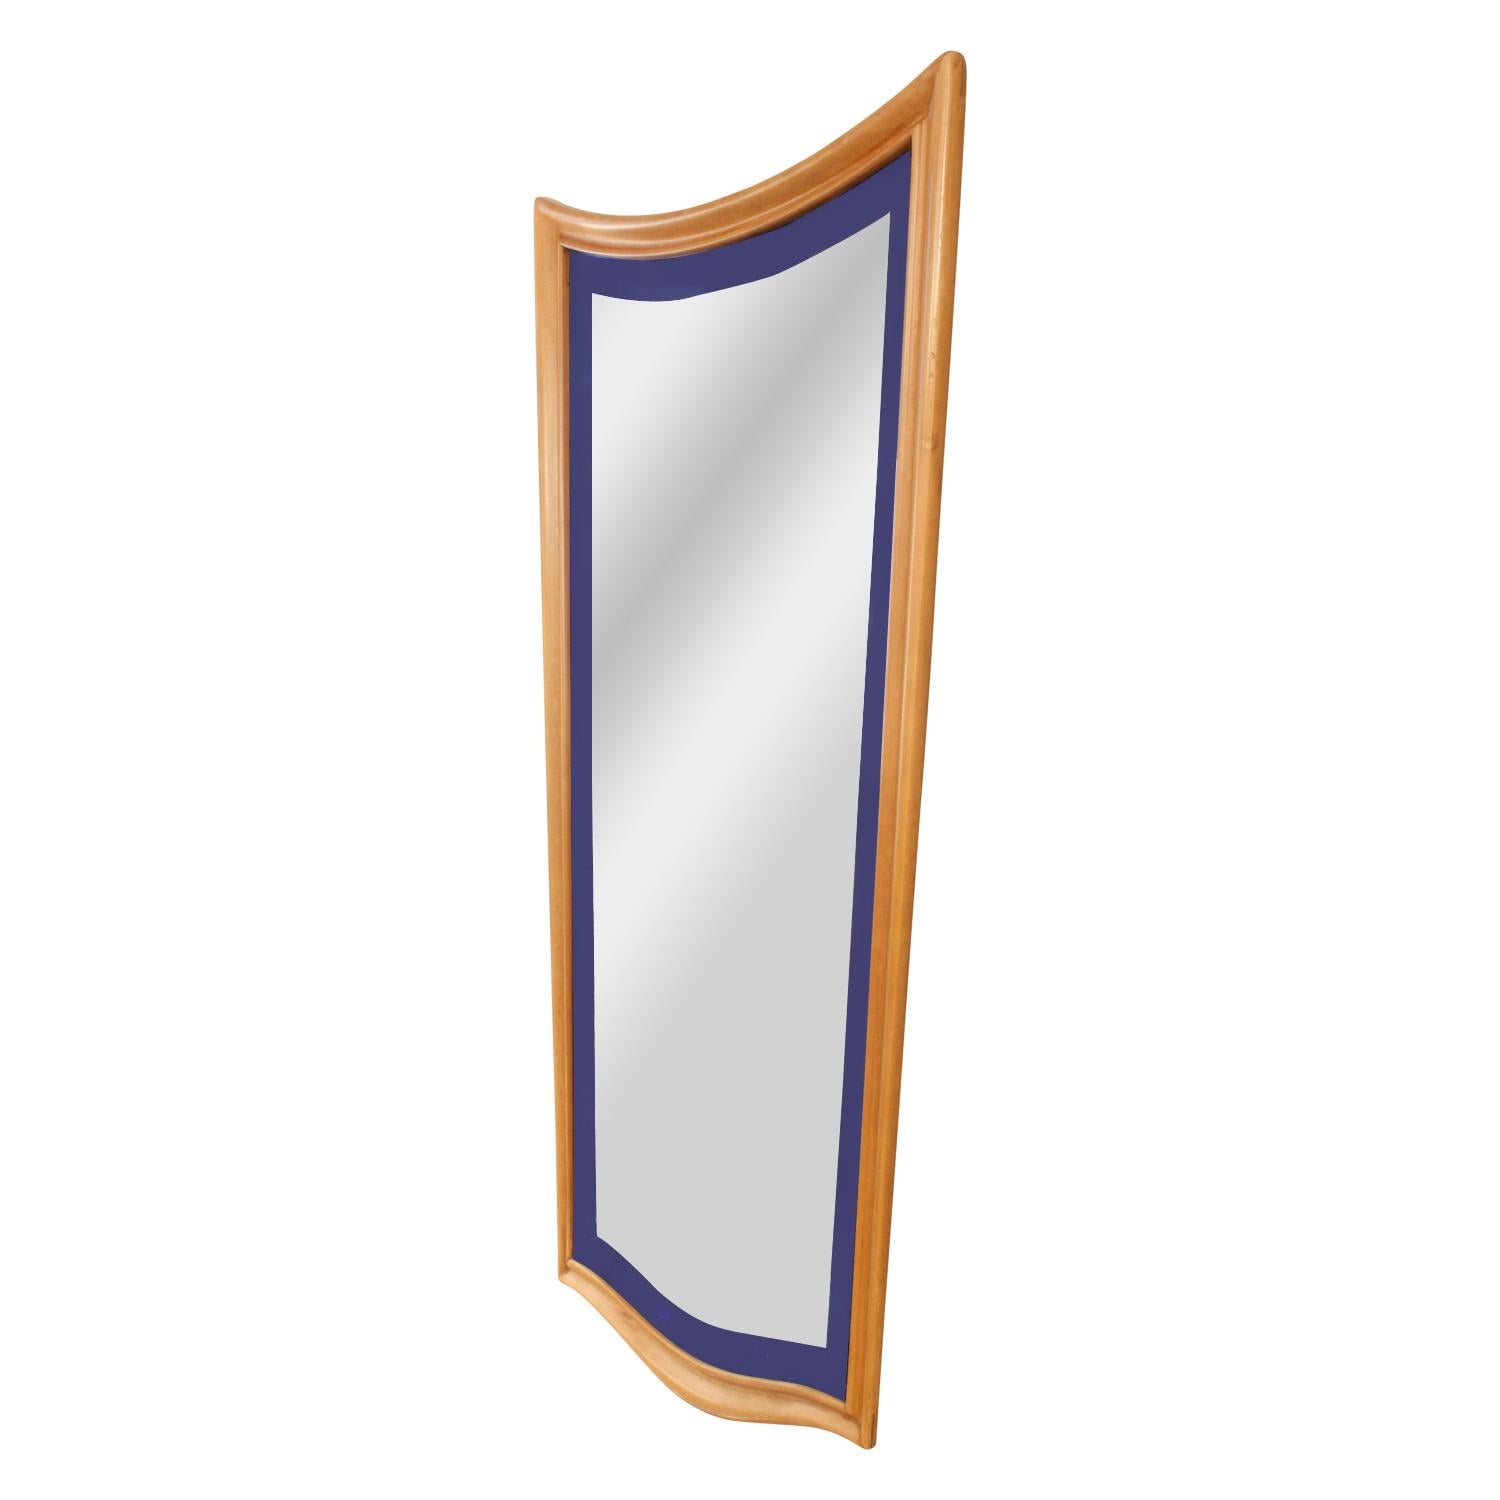 Stylish Art Deco wall-hanging mirror with frame in light maple wood frame with blue glass, Italy 1930's. This mirror is a stunning accent piece in any room.